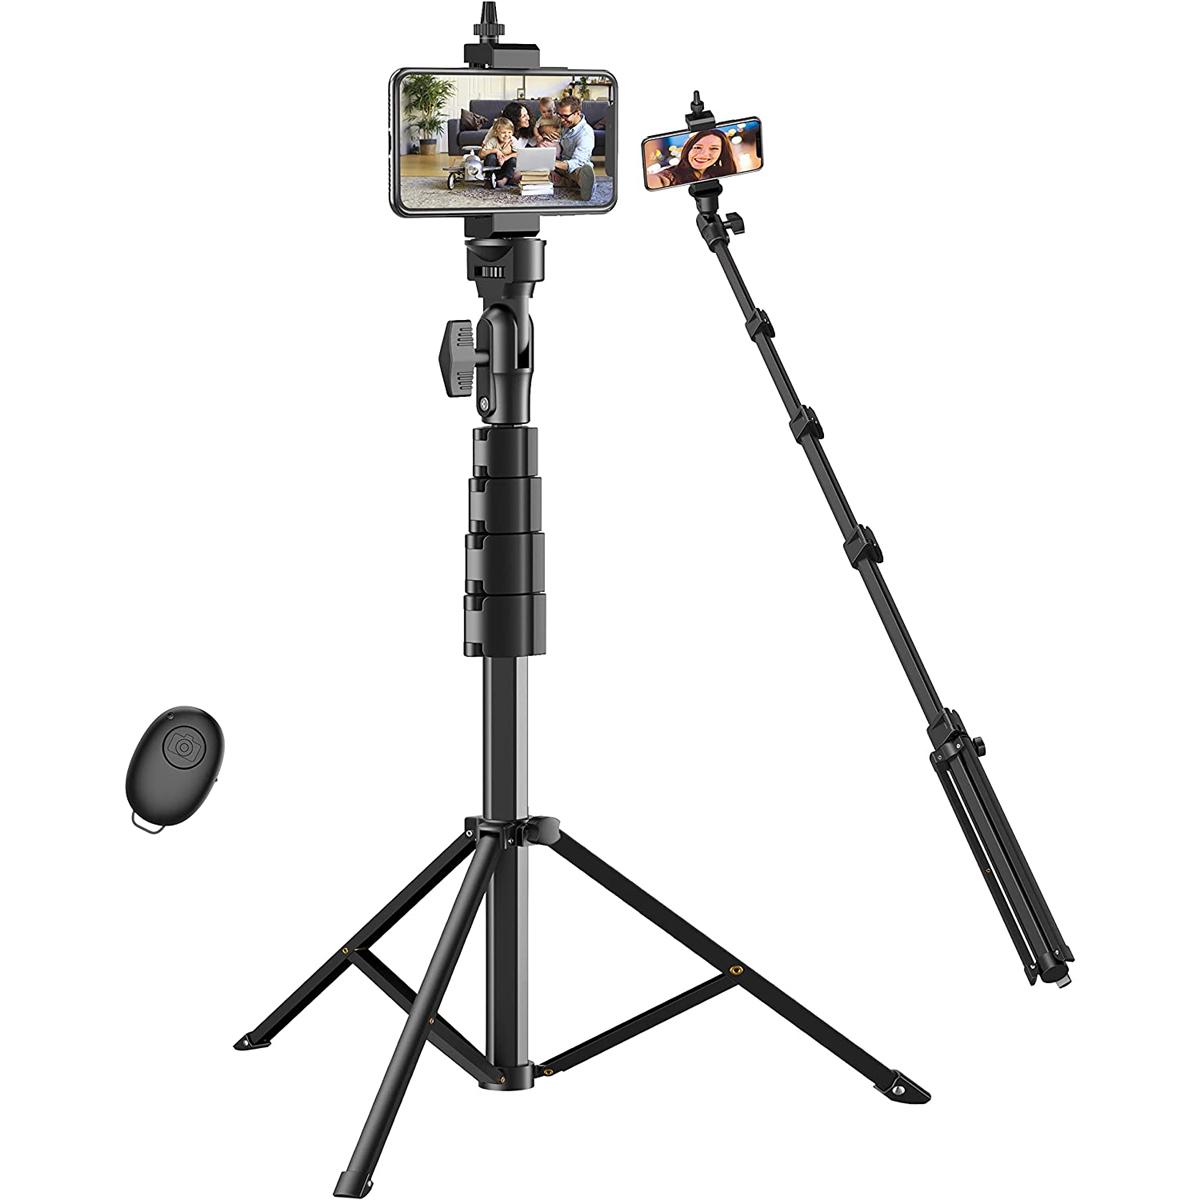 55in Leknes Extendable Selfie Stick Tripod Stand for $7.99